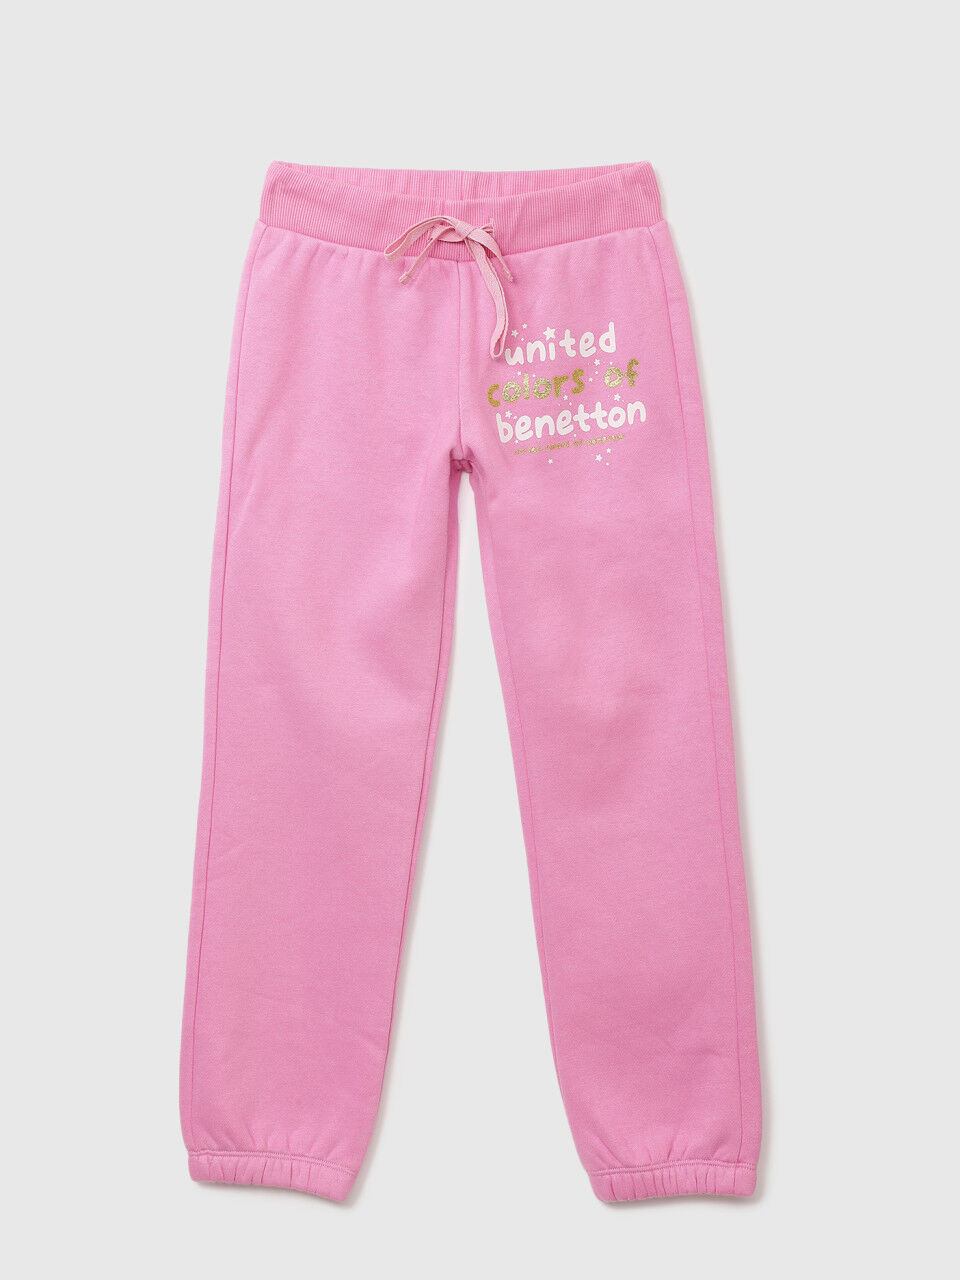 Benetton United Colors of Benetton Girls Pink  100% Polyester Jogger Trousers Size M  Reg 